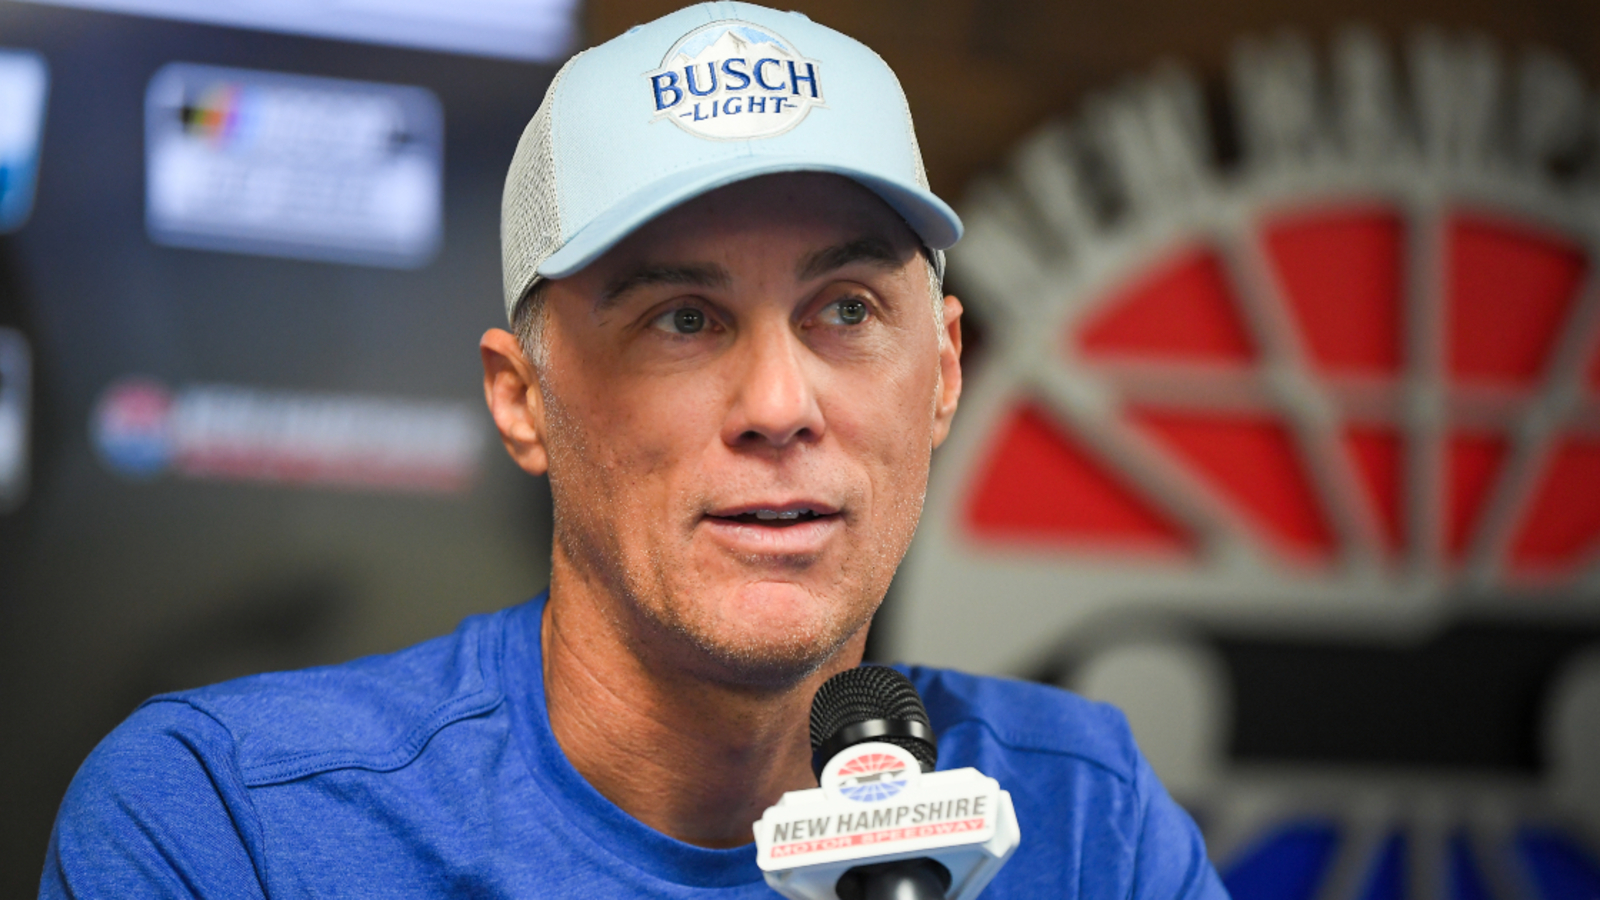 Kevin Harvick weighs in on Kyle Larson, Chris Buescher photo finish, fires back at critics of finish line paint job